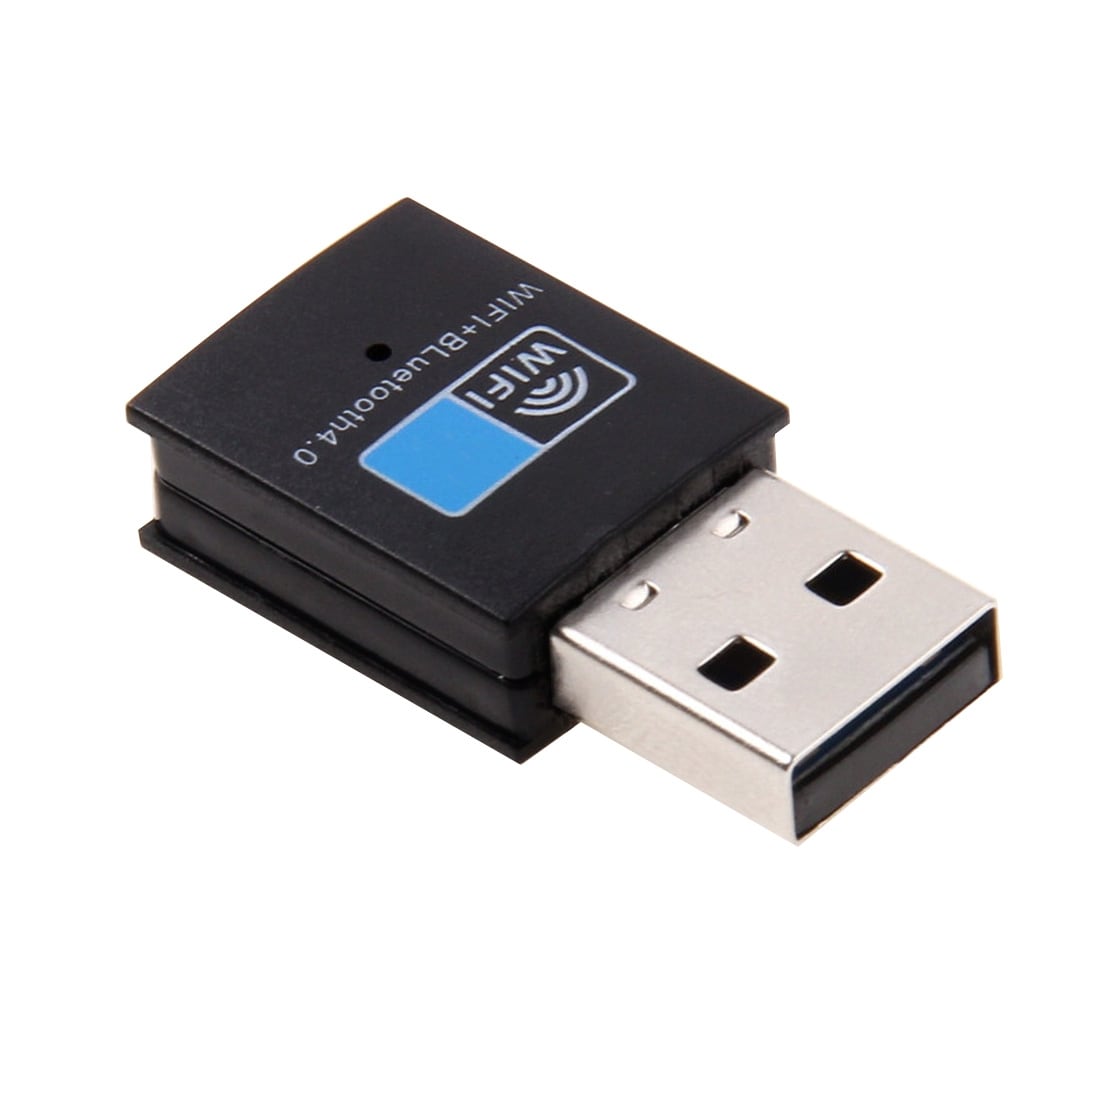 Bluetooth 4.0 + 150Mbps 2.4GHz USB WiFi Adapter